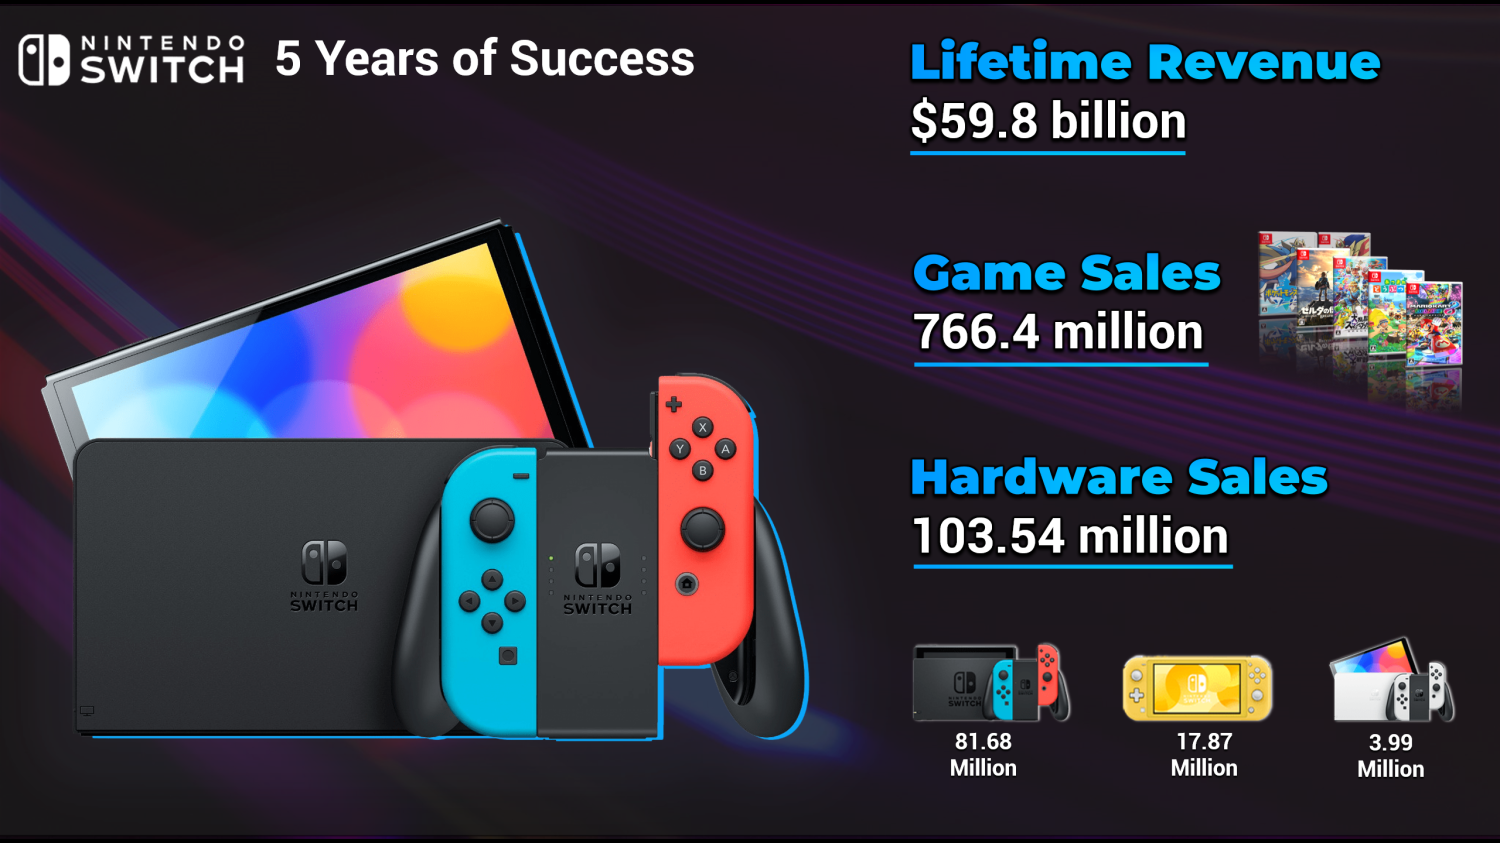 In Less Than a Year, Nintendo Switch Passed Lifetime Sales of Wii U